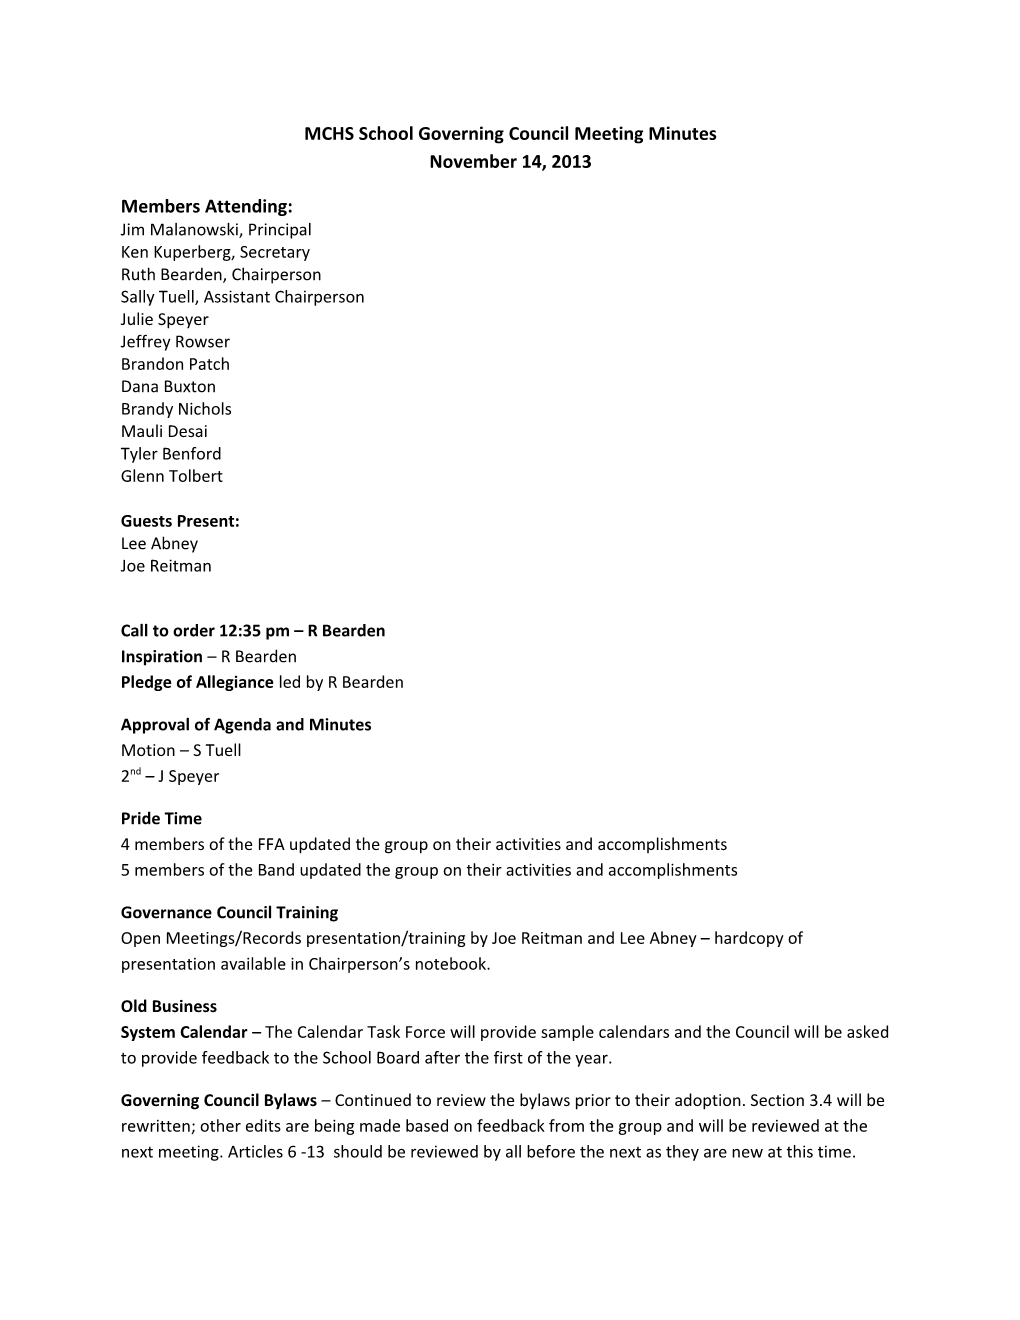 MCHS School Governing Council Meeting Minutes November 14, 2013